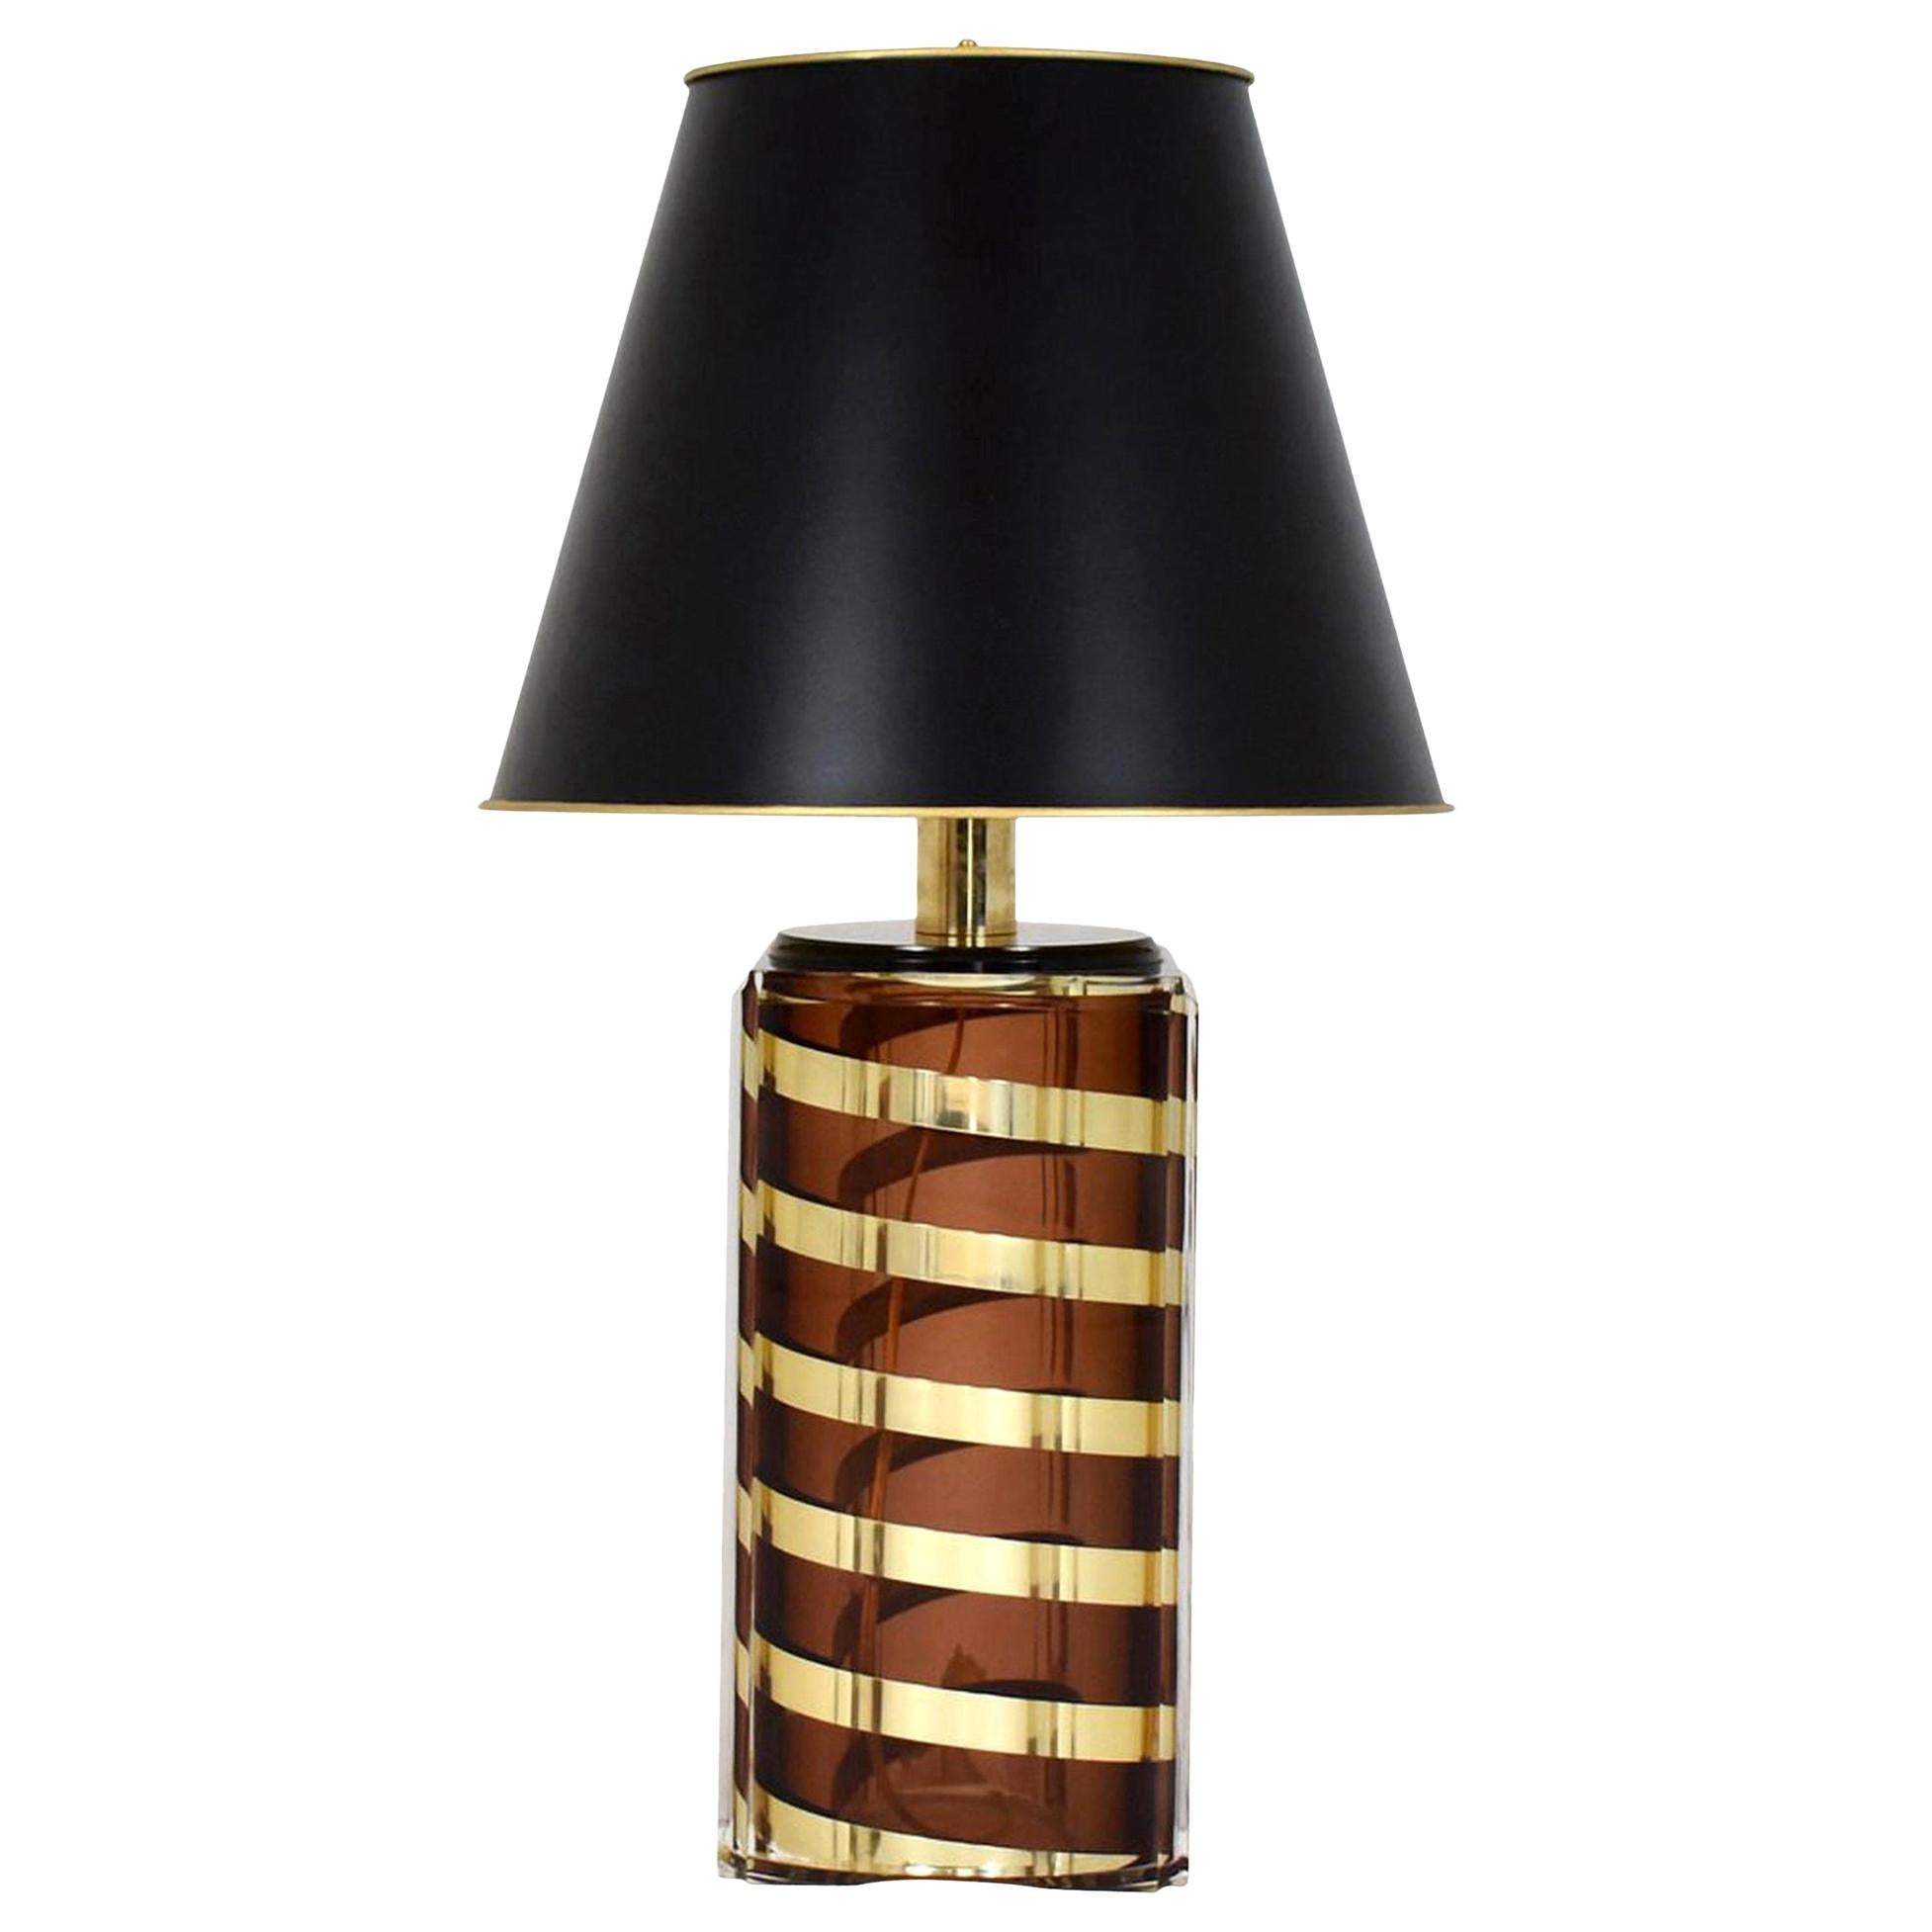 Vintage Lucite and Brass Lamp with Black Paper Shade